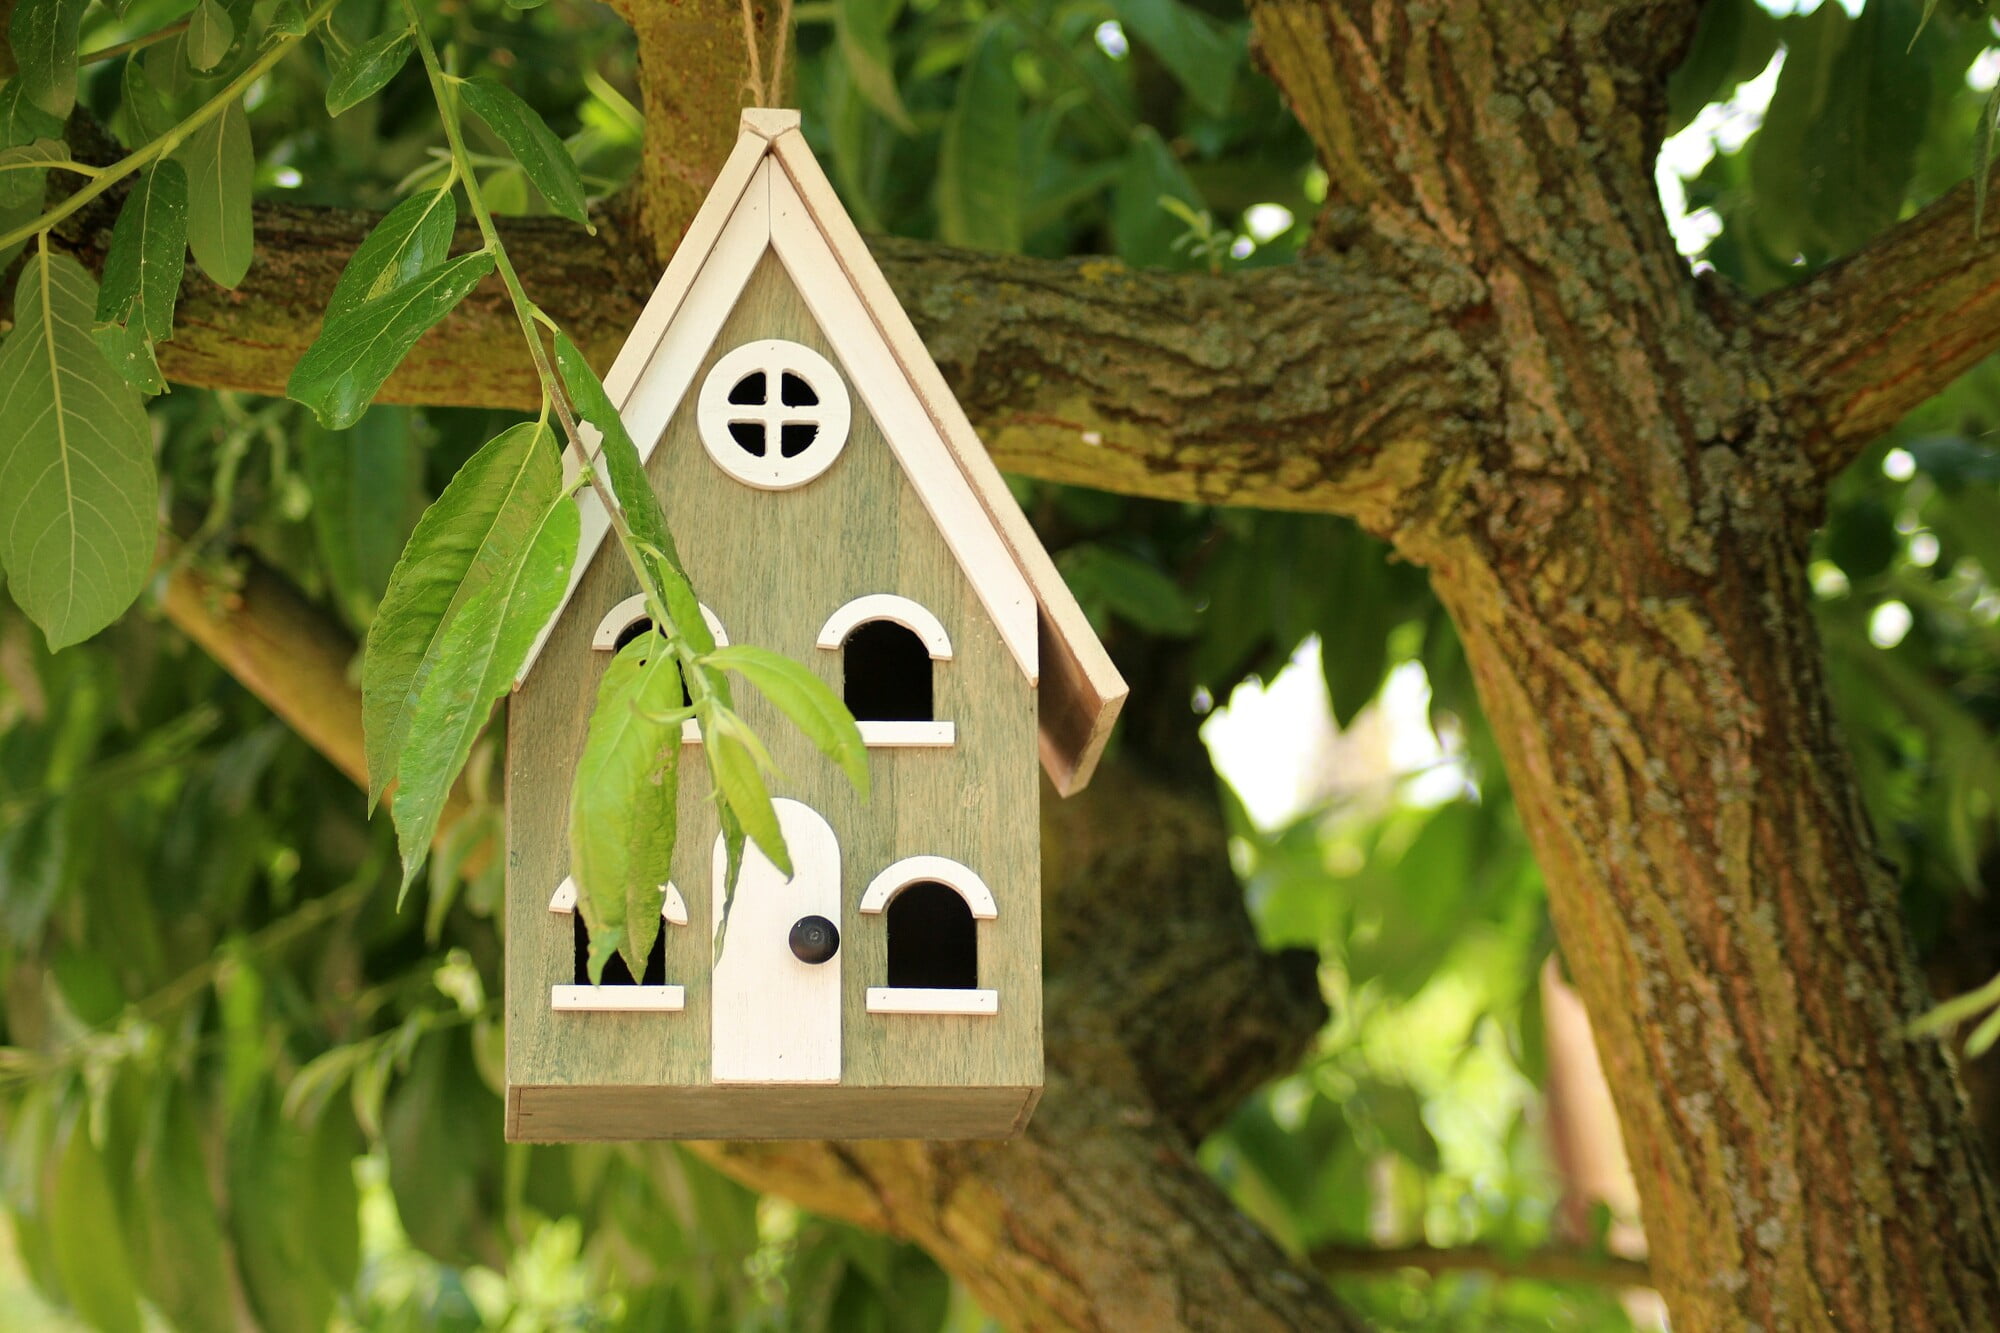 Are you looking for the perfect bird house for your backyard? Click here for the ultimate guide to choosing a bird house for your home.